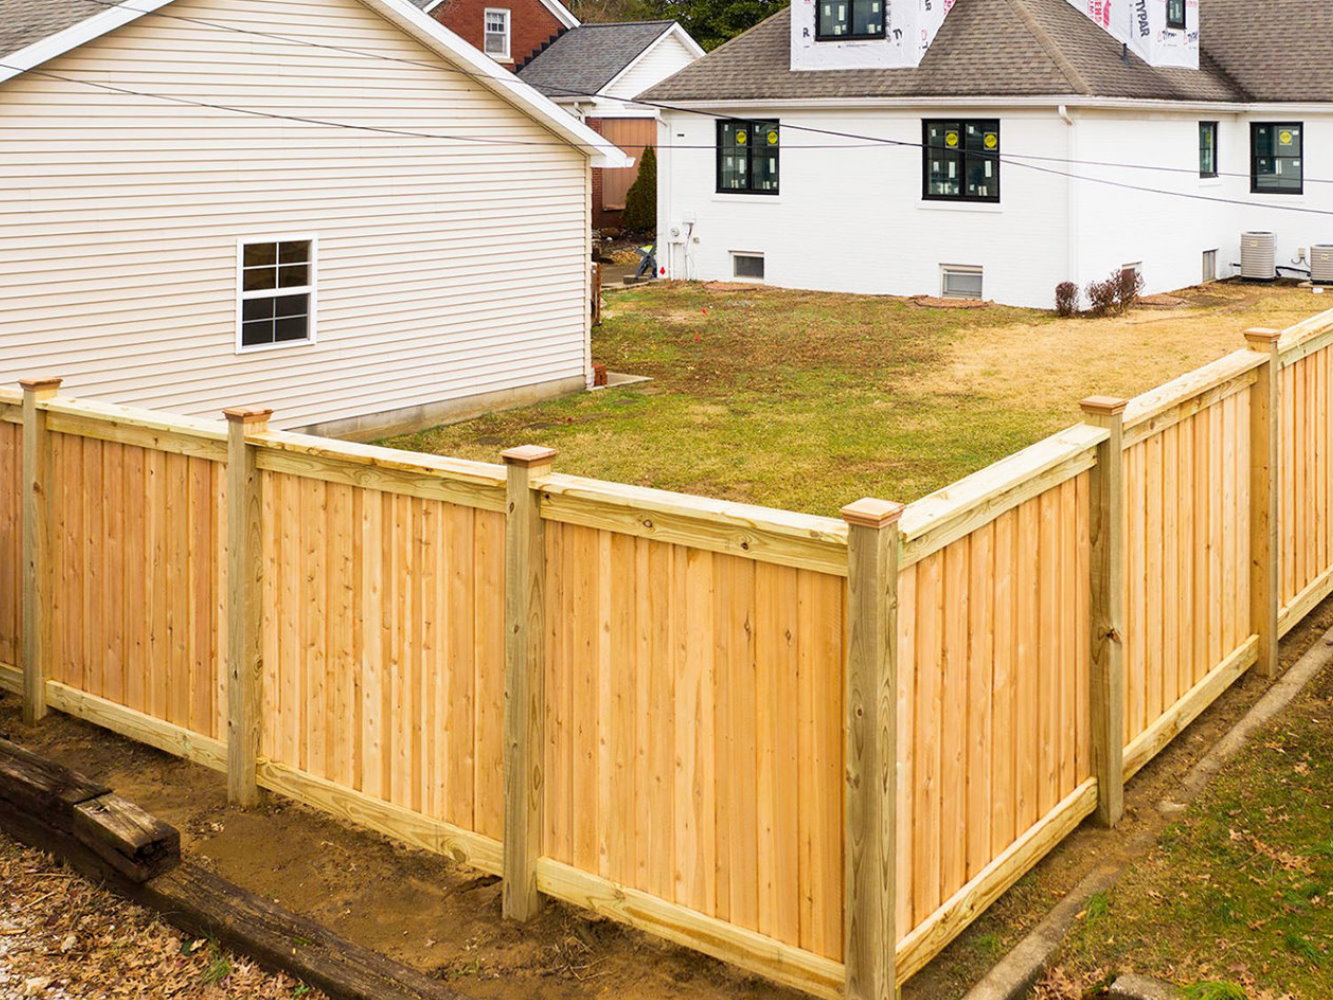 Newburgh IN cap and trim style wood fence